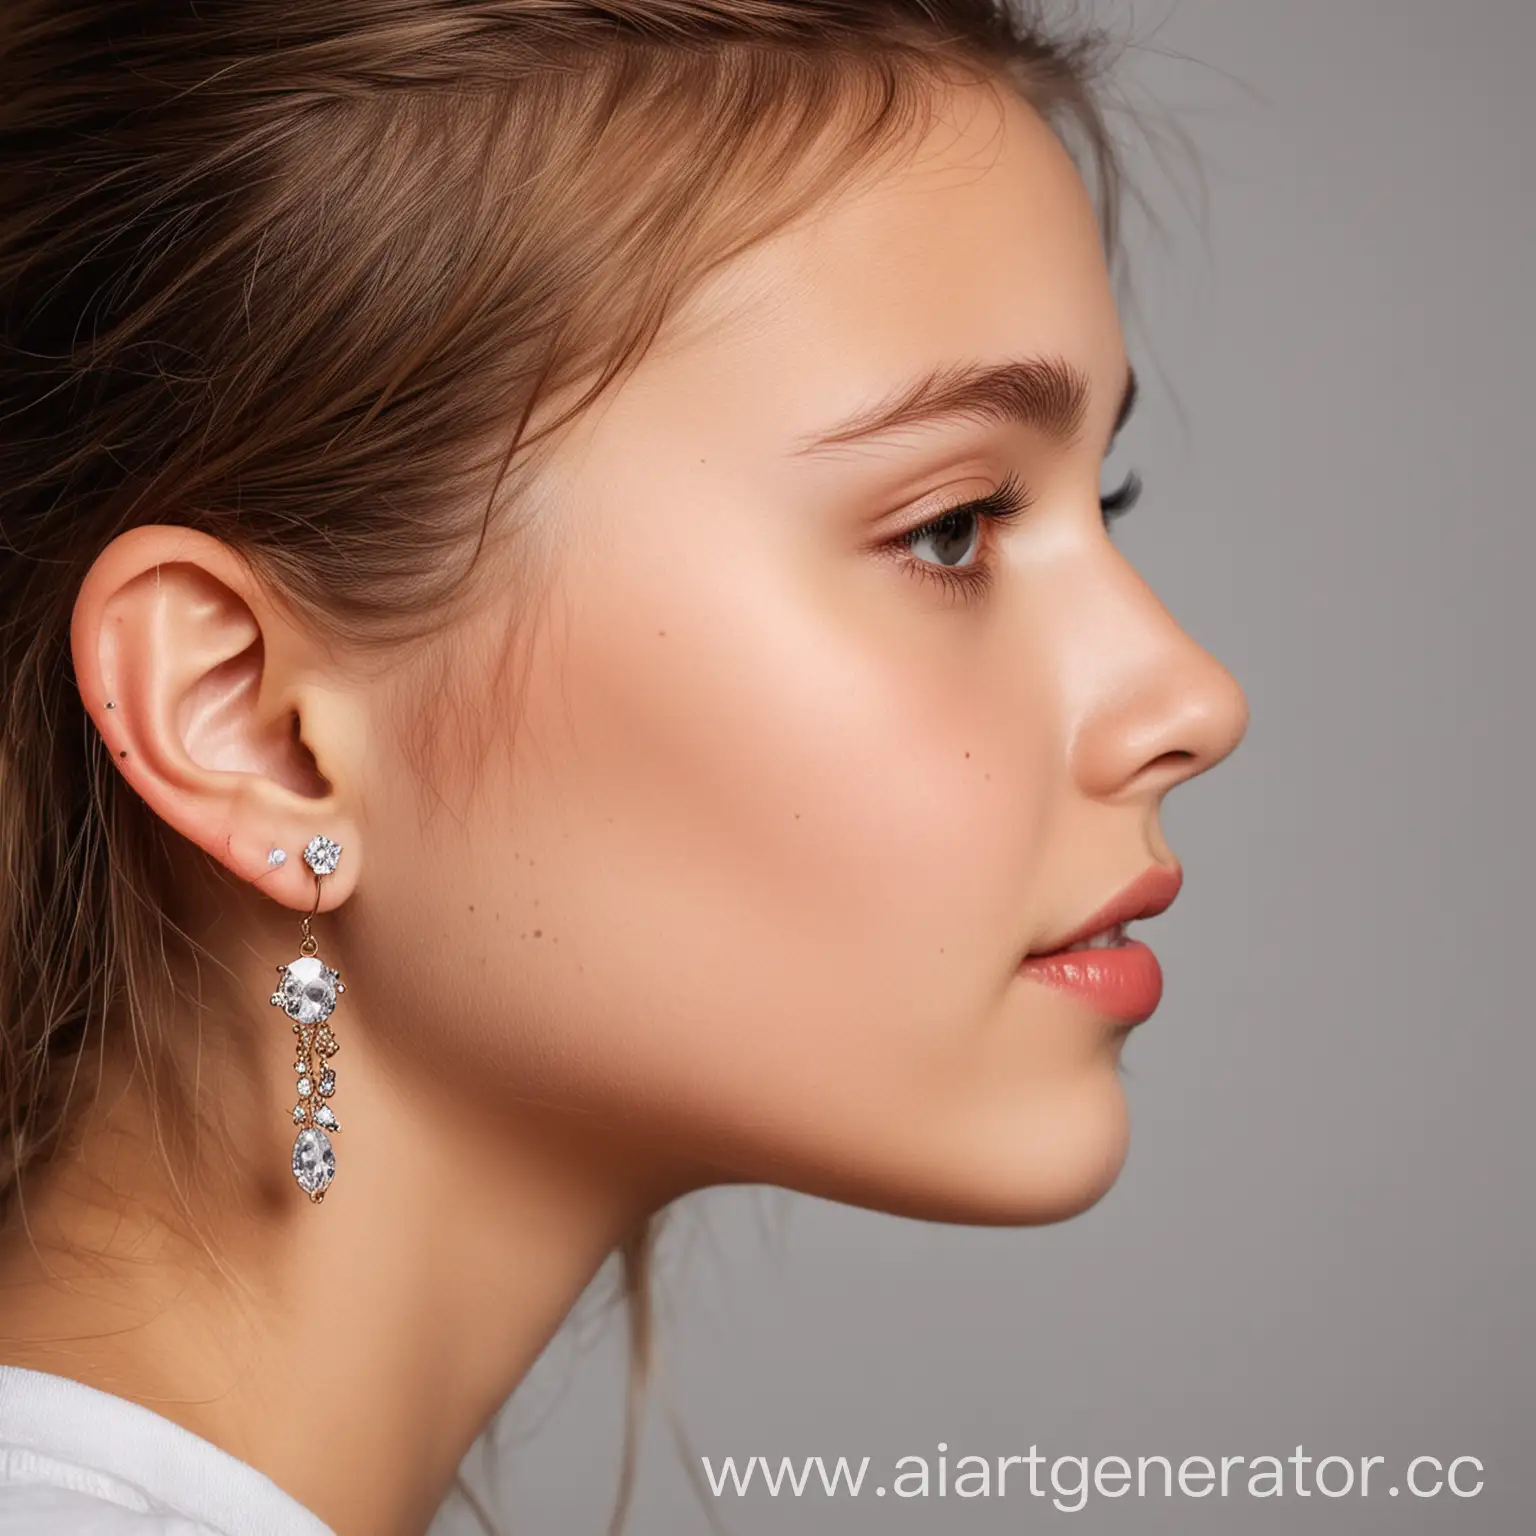 Profile-Portrait-of-a-Girl-with-Elegant-Earrings